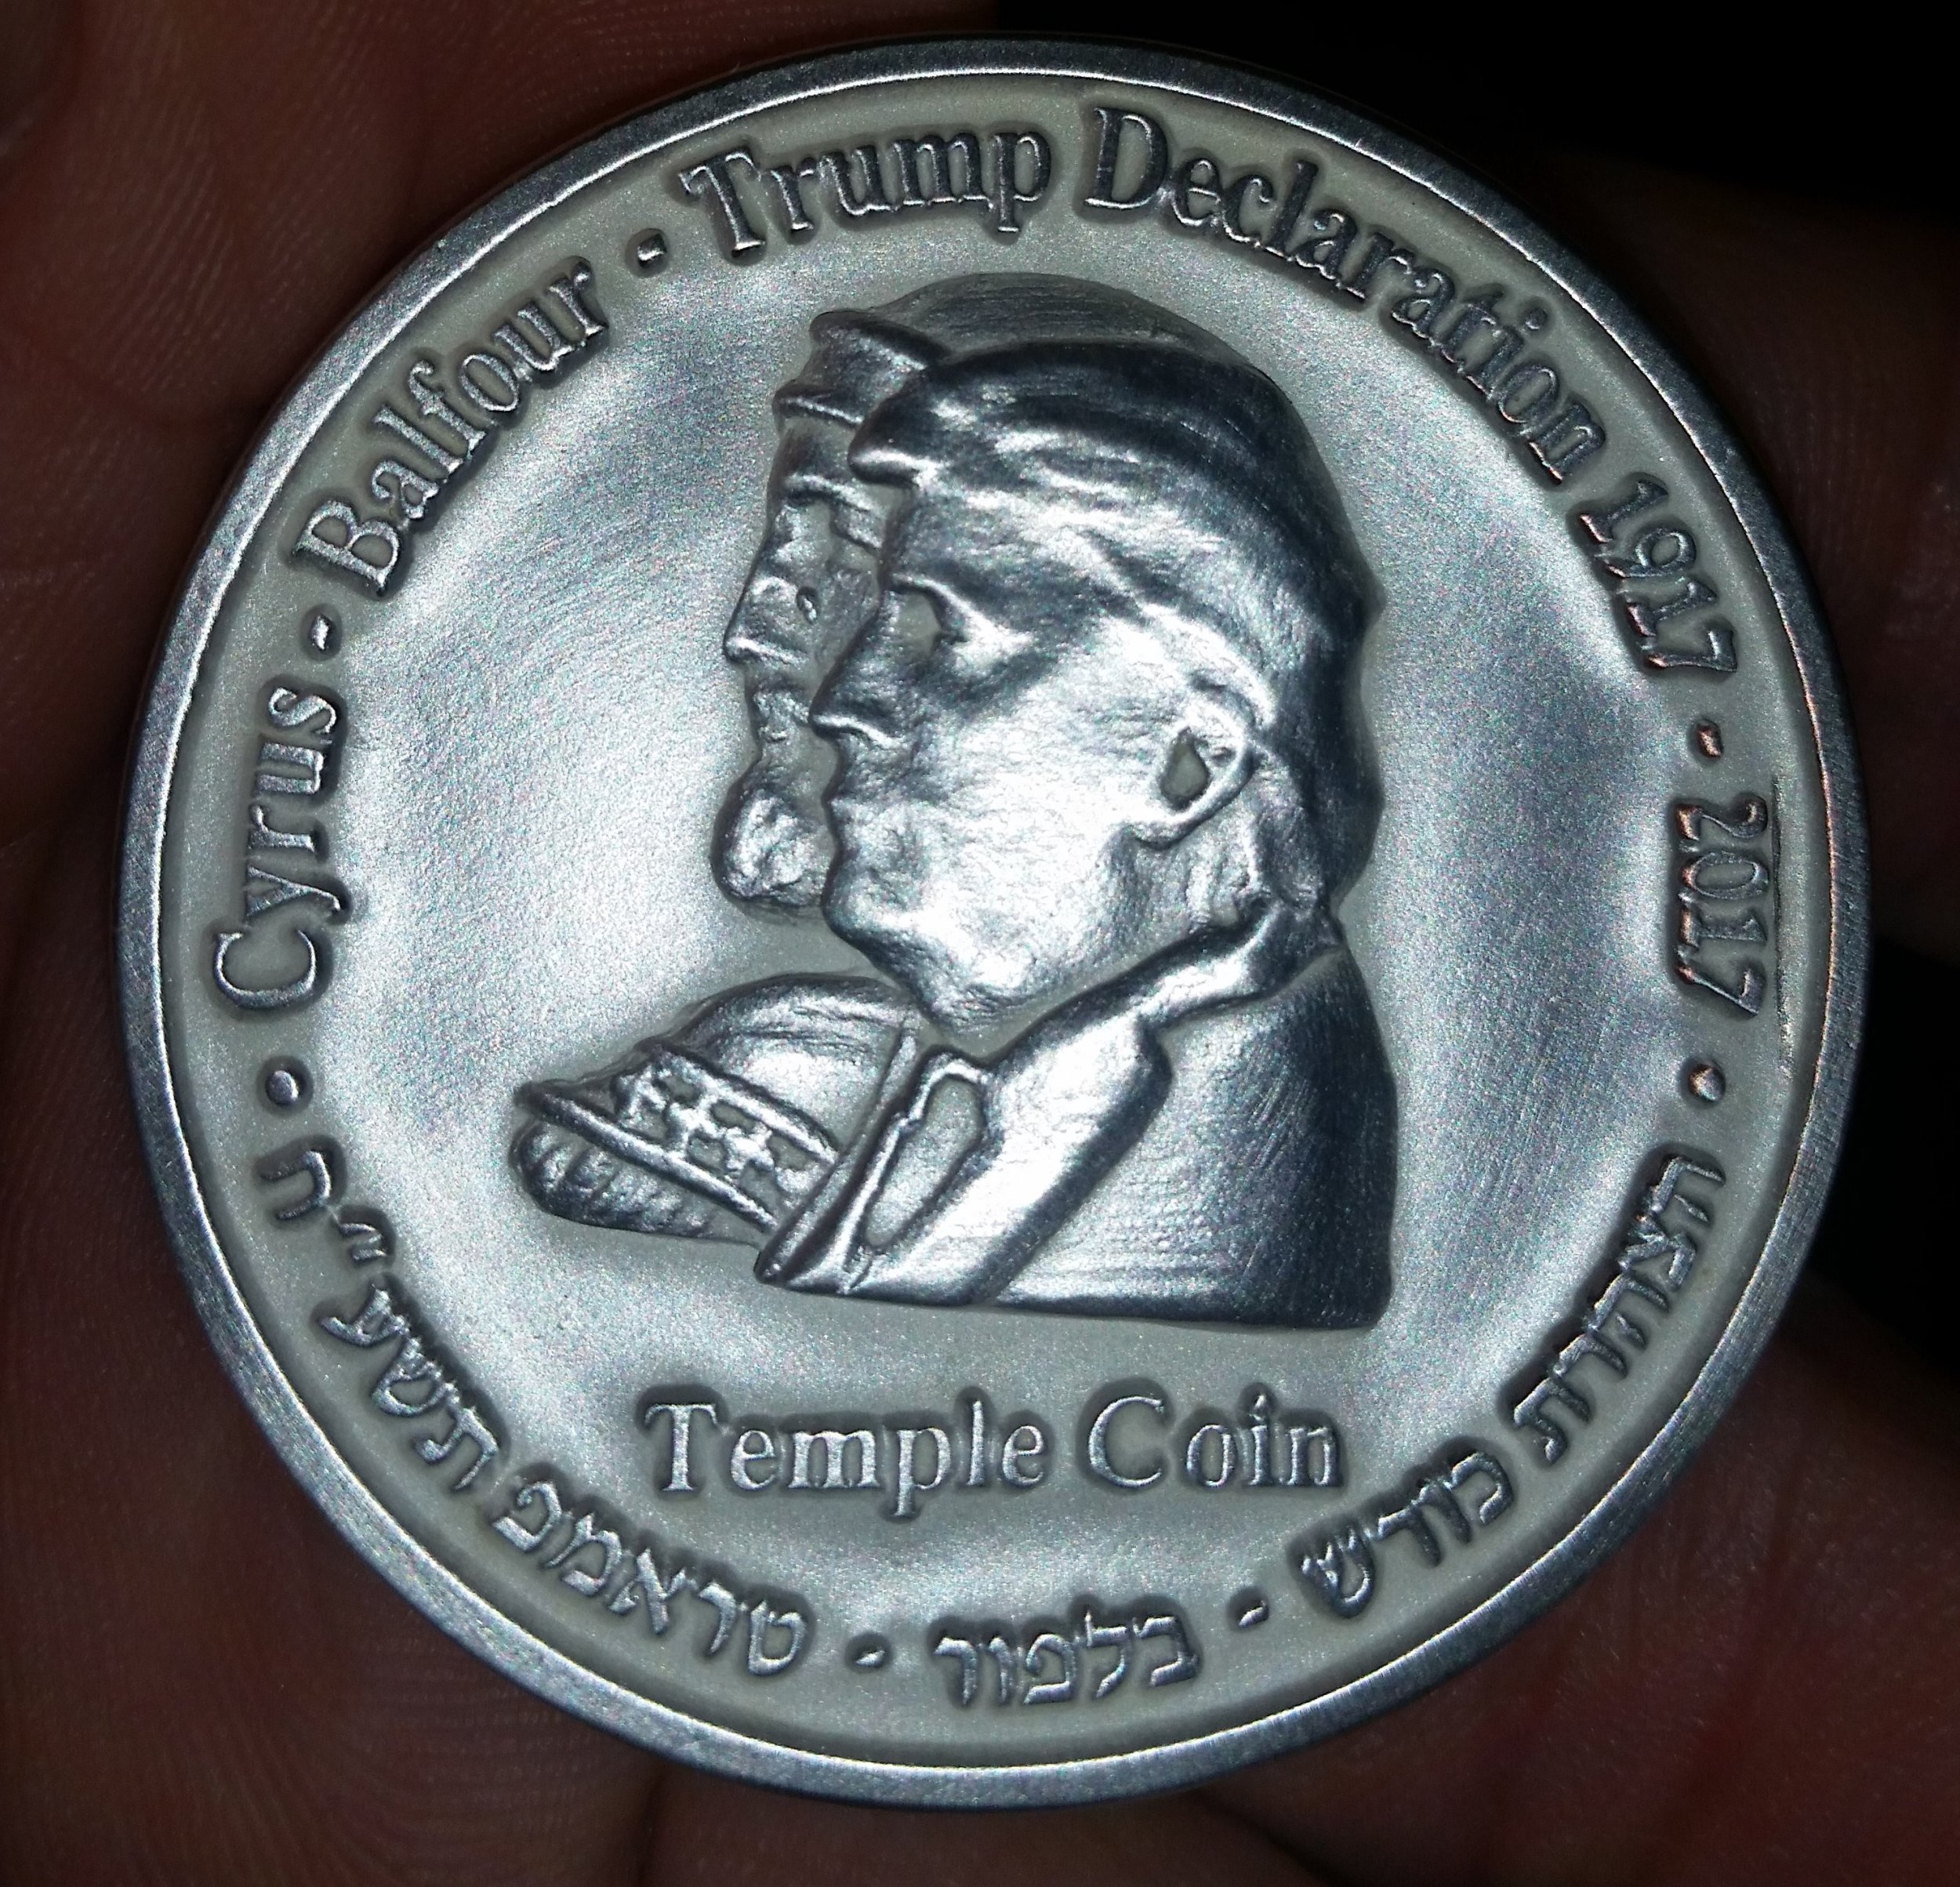 Trumpcoin front side